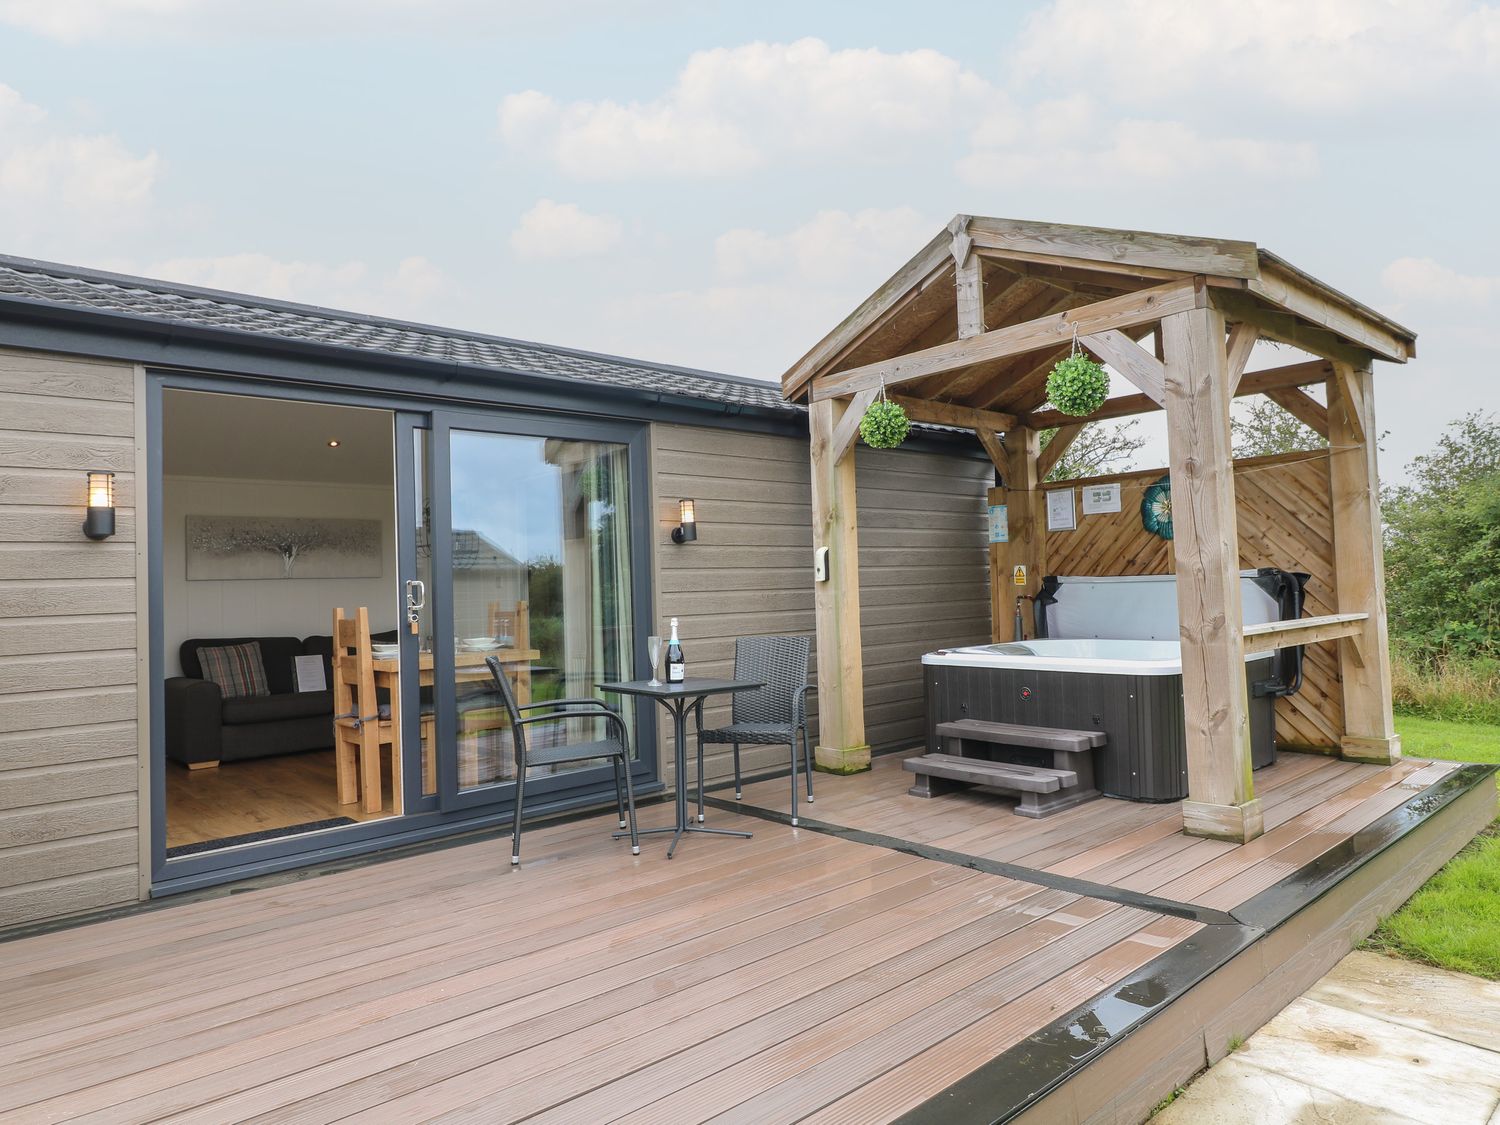 Oak, is near Donisthorpe, Leicestershire. One-bedroom lodge with lakeside views. Hot tub. Romantic. 